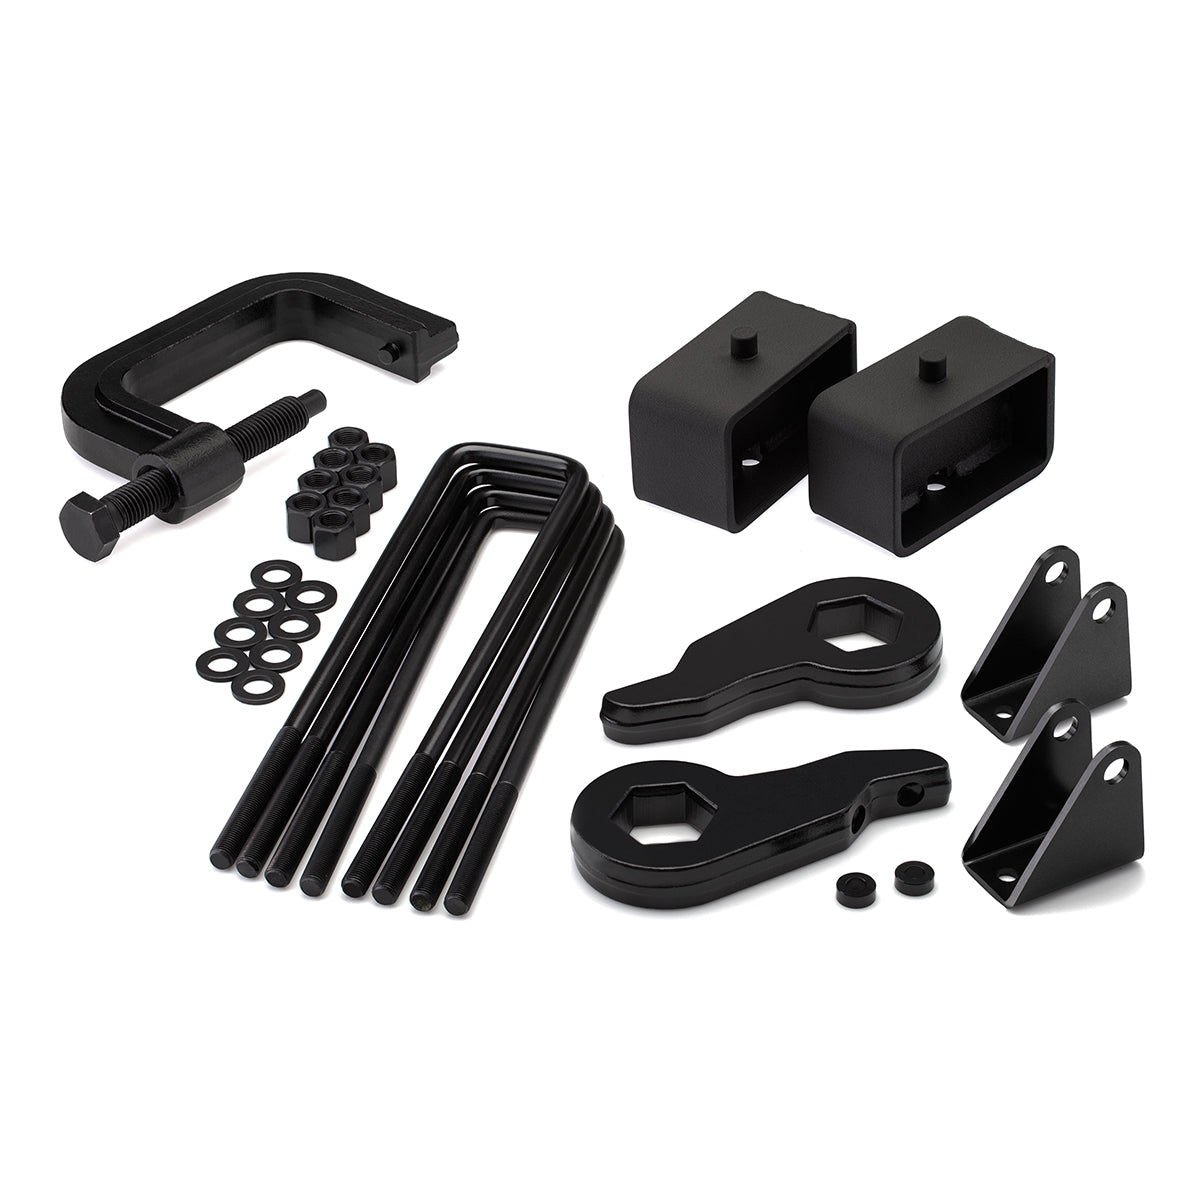 2001-2010 GMC Sierra 1500HD Full Lift Kit with Shock Extender Brackets and Torsion Key Unloading/Removal Tool